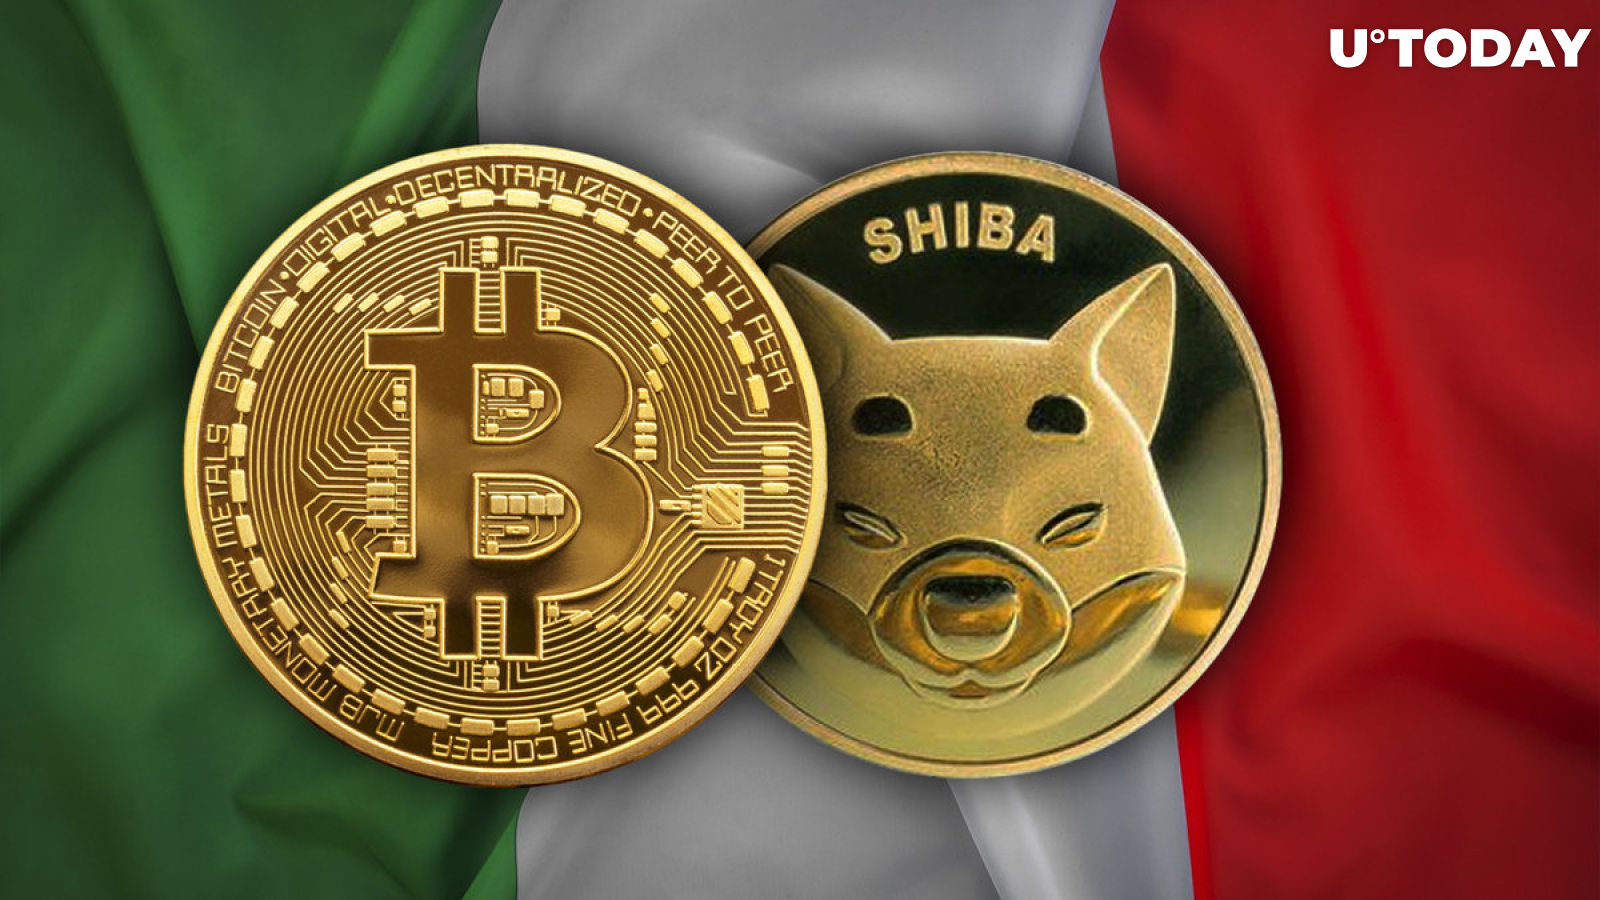 Shiba Inu (SHIB), Bitcoin (BTC) Can Now Be Utilized at 5,000 Outlets in Italy Through This Partnership